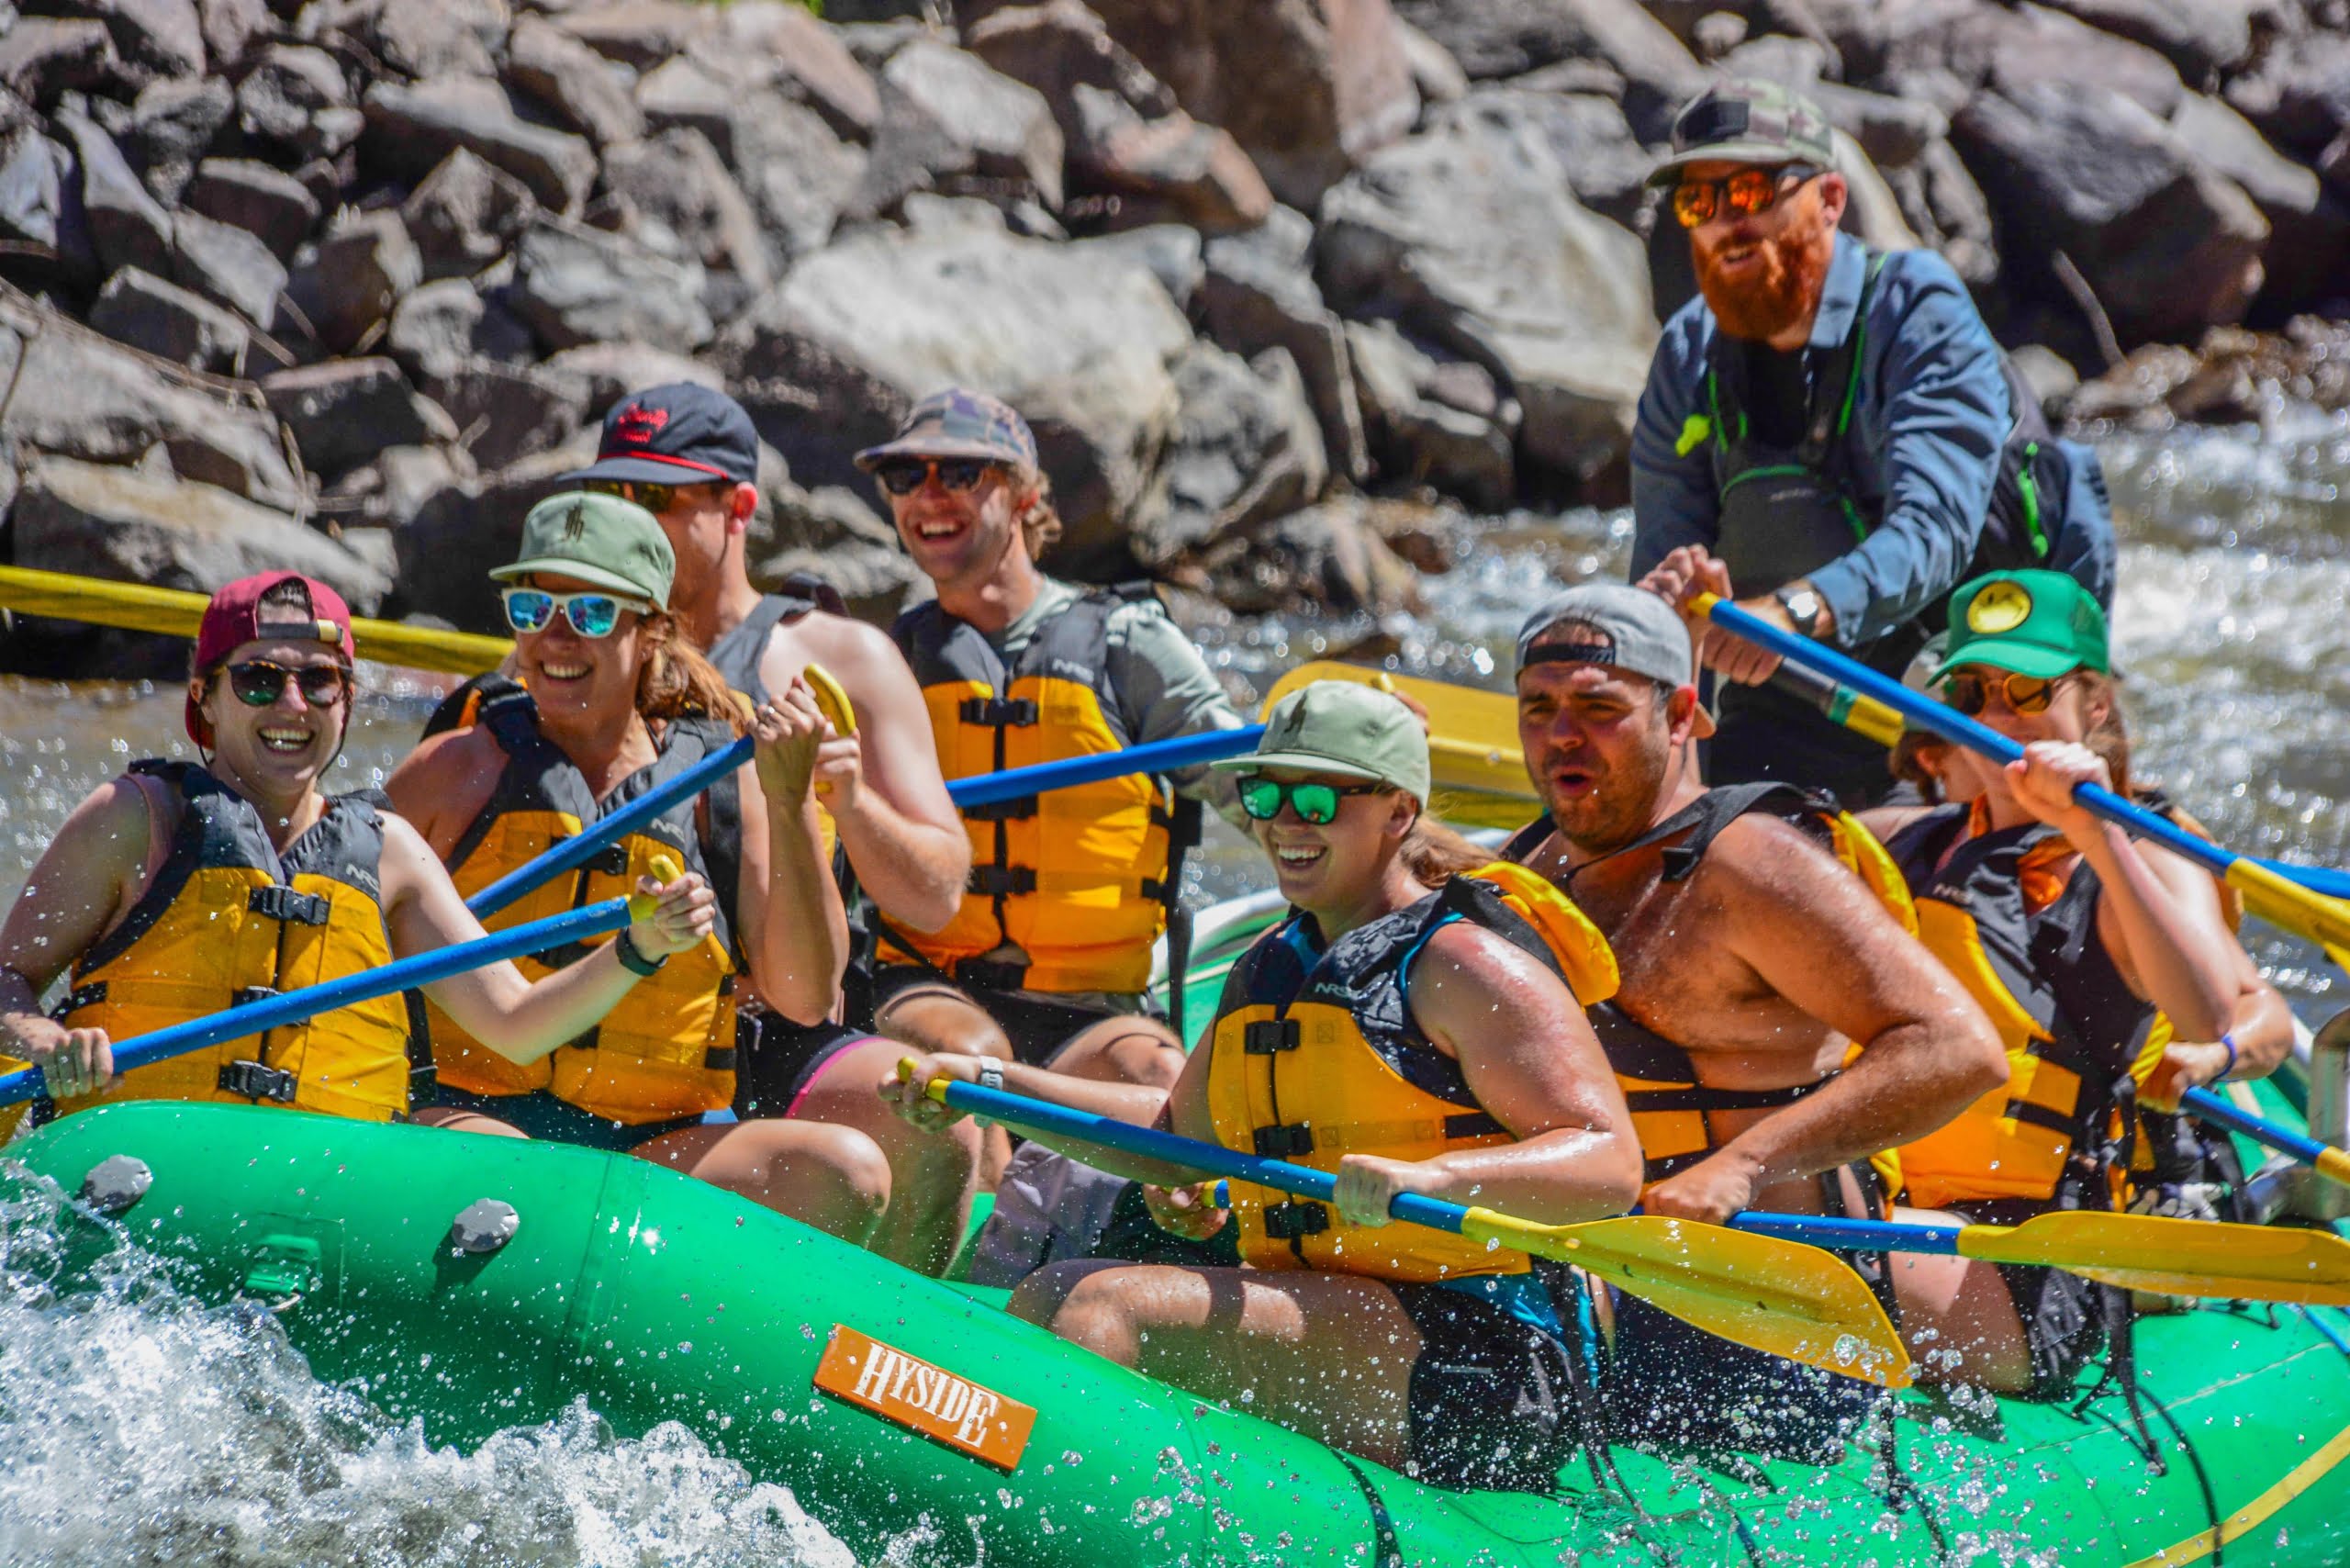 Group Rafting near Silverthorne on the Colorado River